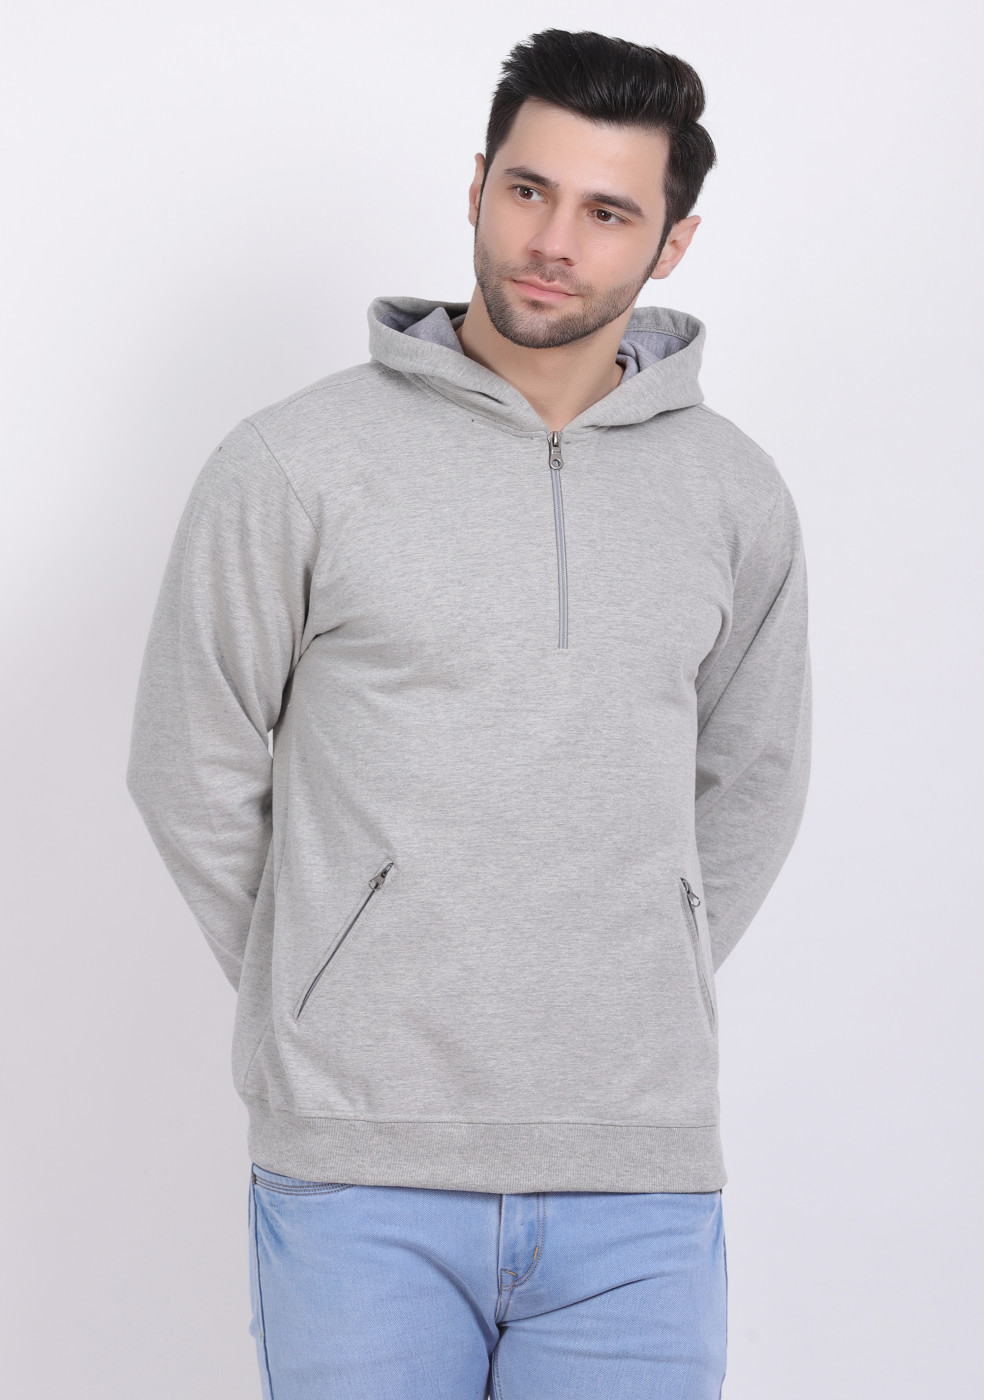 Full Sleeve Gray Zipper Pure Cotton Hoodie For Men